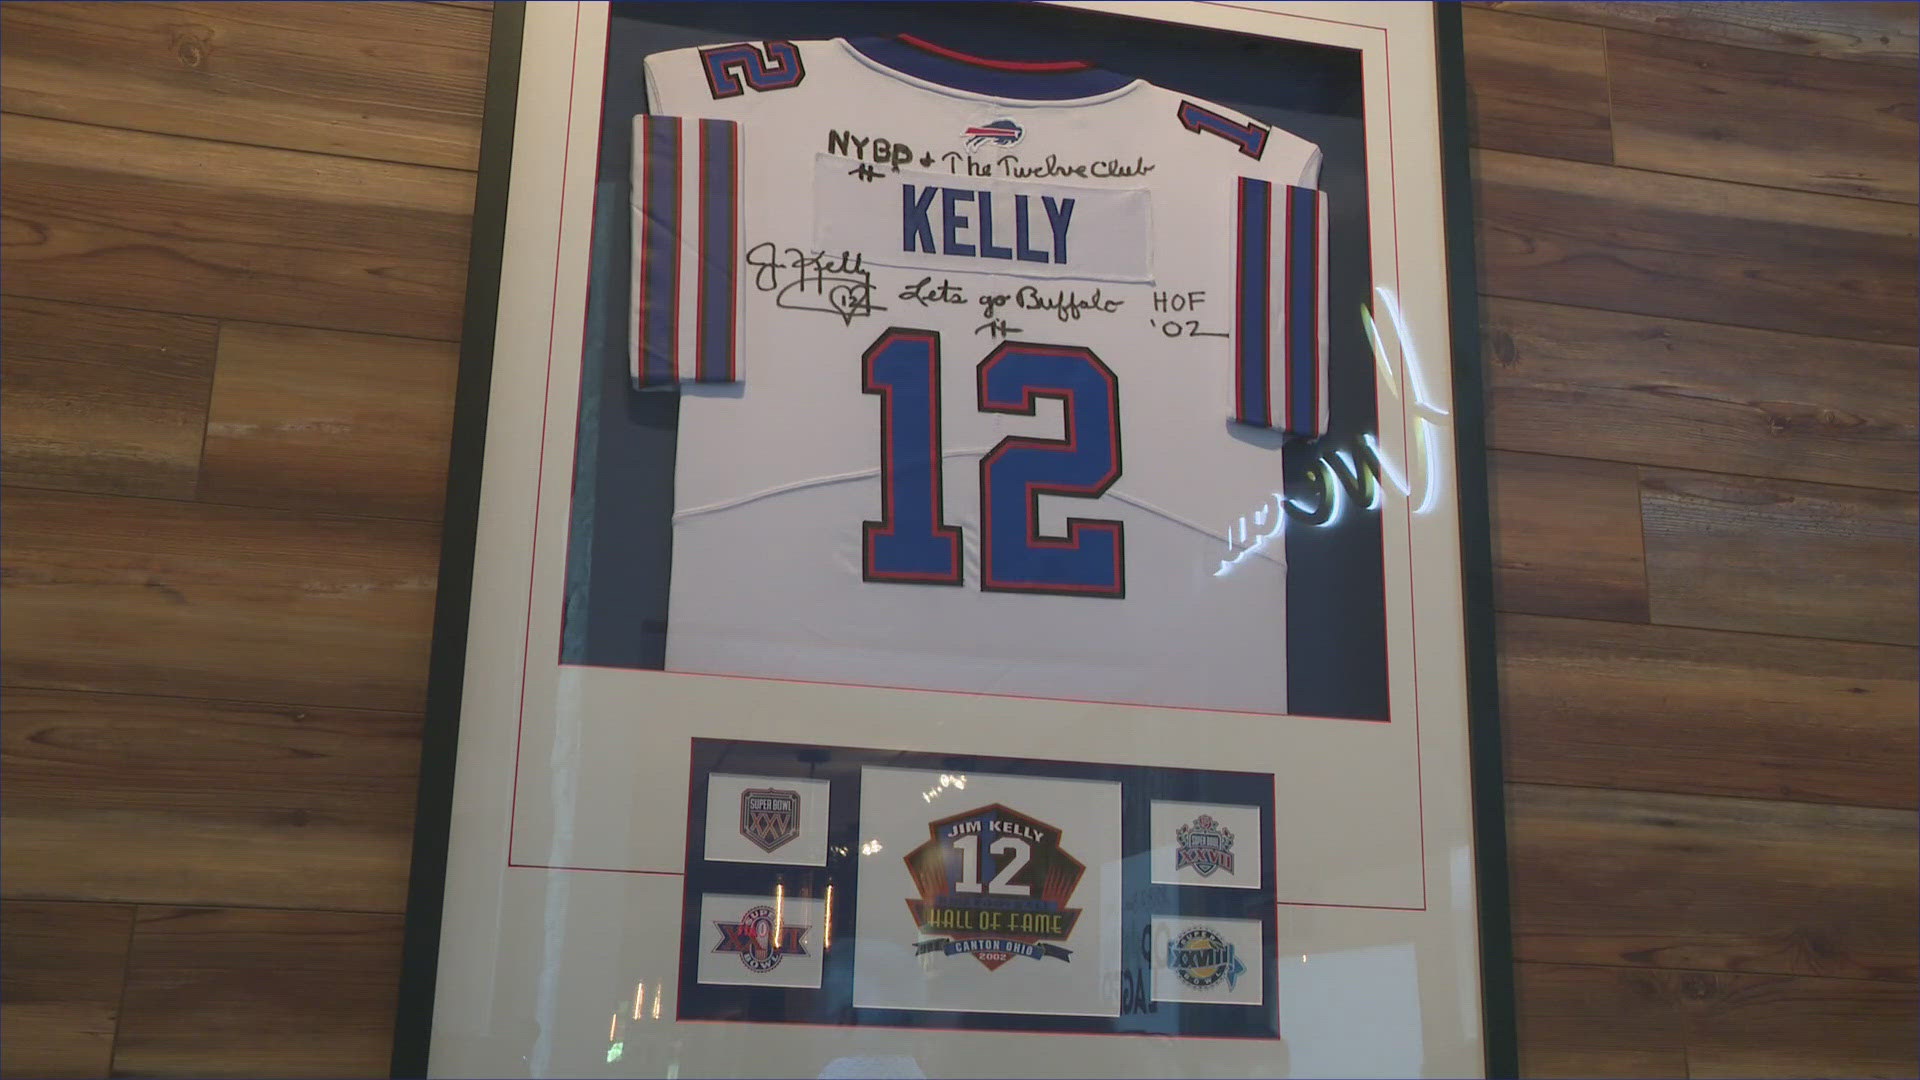 A ribbon cutting was held Friday for 'The Twelve Club', a space at the New York Beer Project named after Buffalo Bills great Jim Kelly.